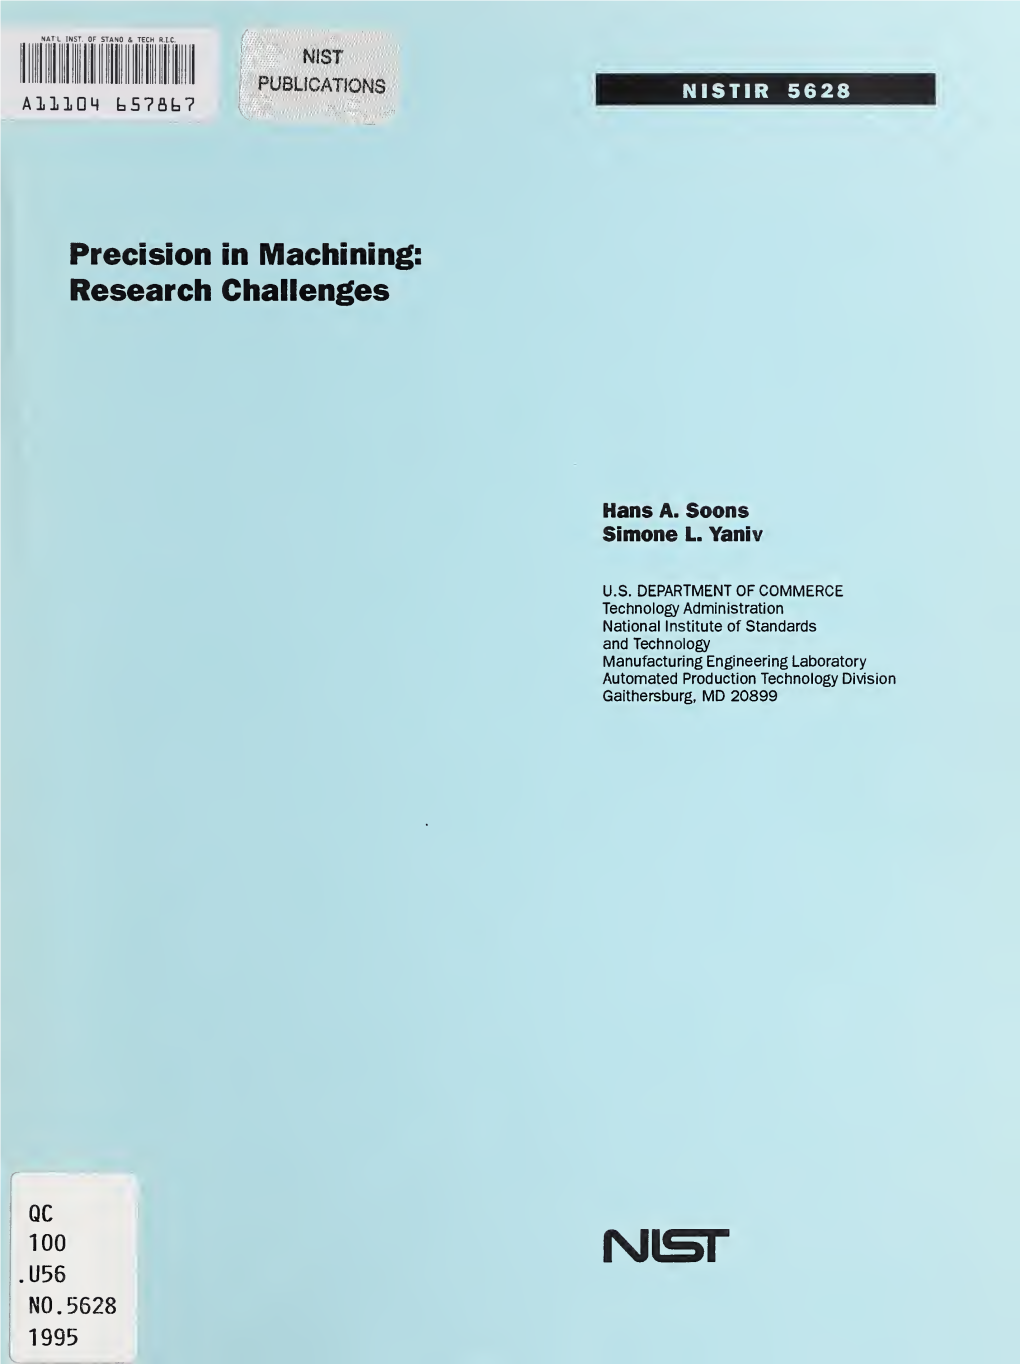 Precision in Machining: Research Challenges